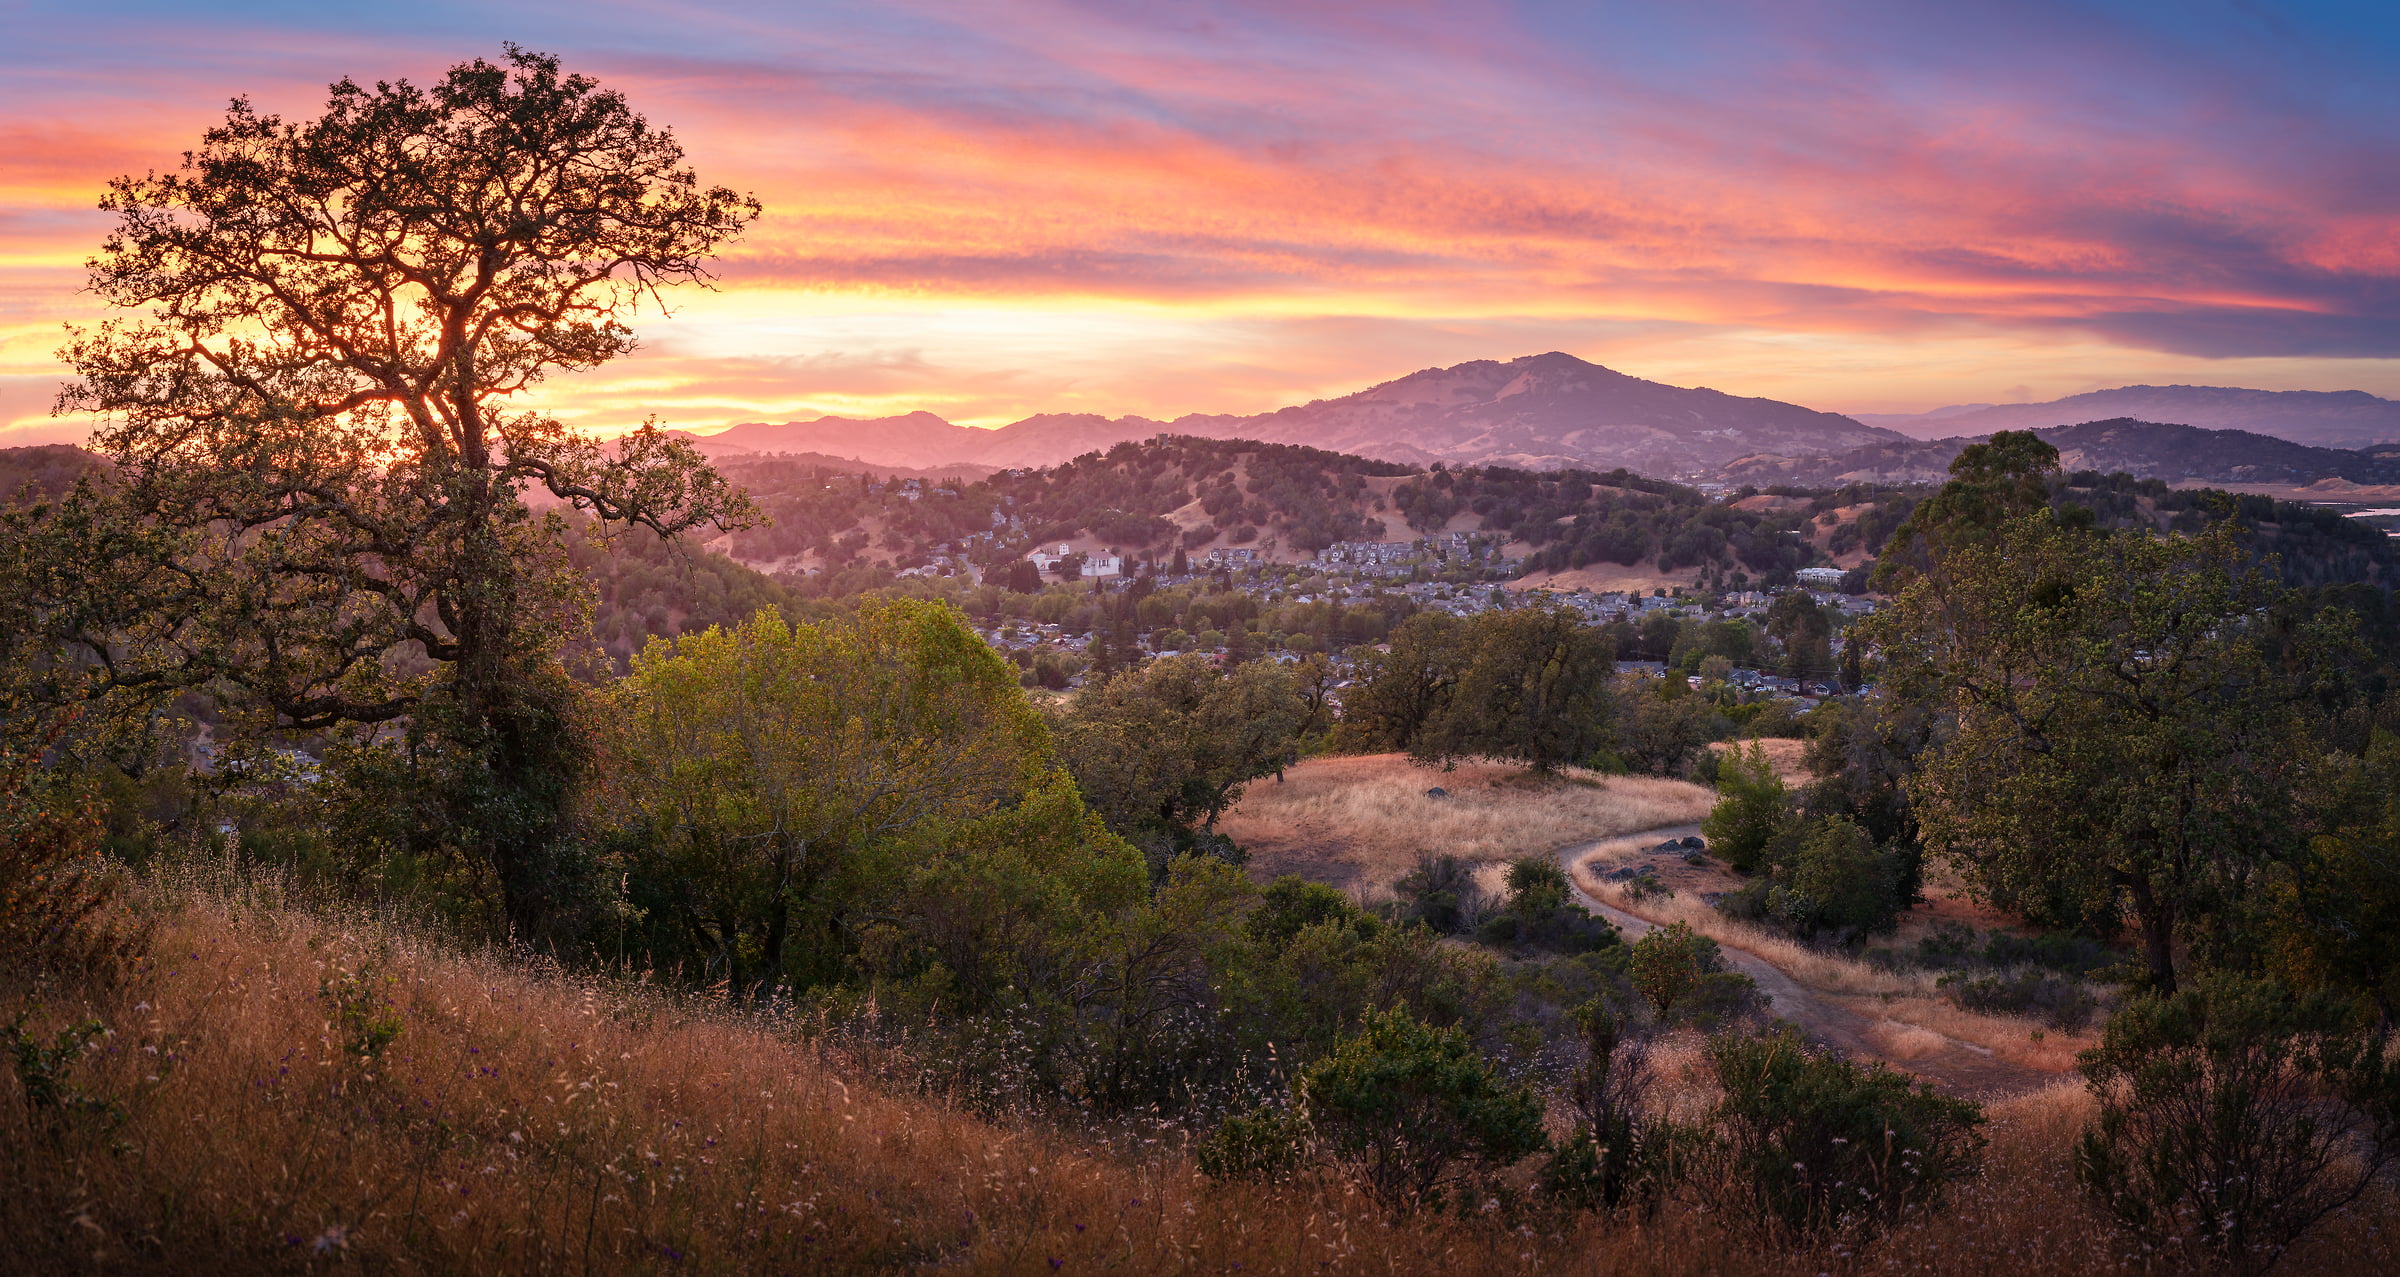 184 megapixels! A very high resolution, large-format VAST photo print of sunset in Novato, California; landscape photograph created by Jeff Lewis.